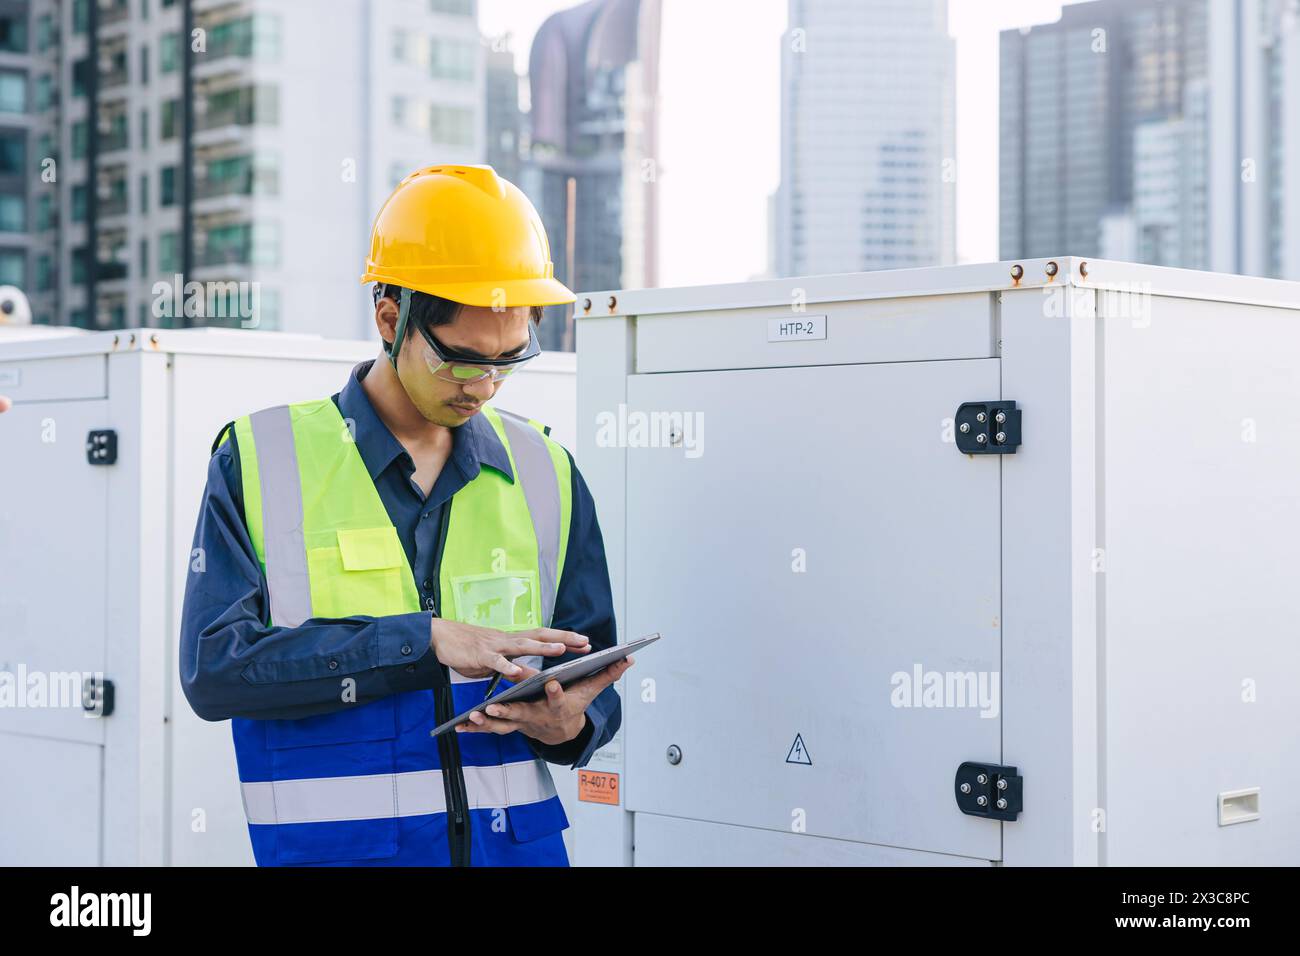 engineer male technician worker working service commercial building heat pump hot water supply systems. man safety checking maintenance heating water Stock Photo